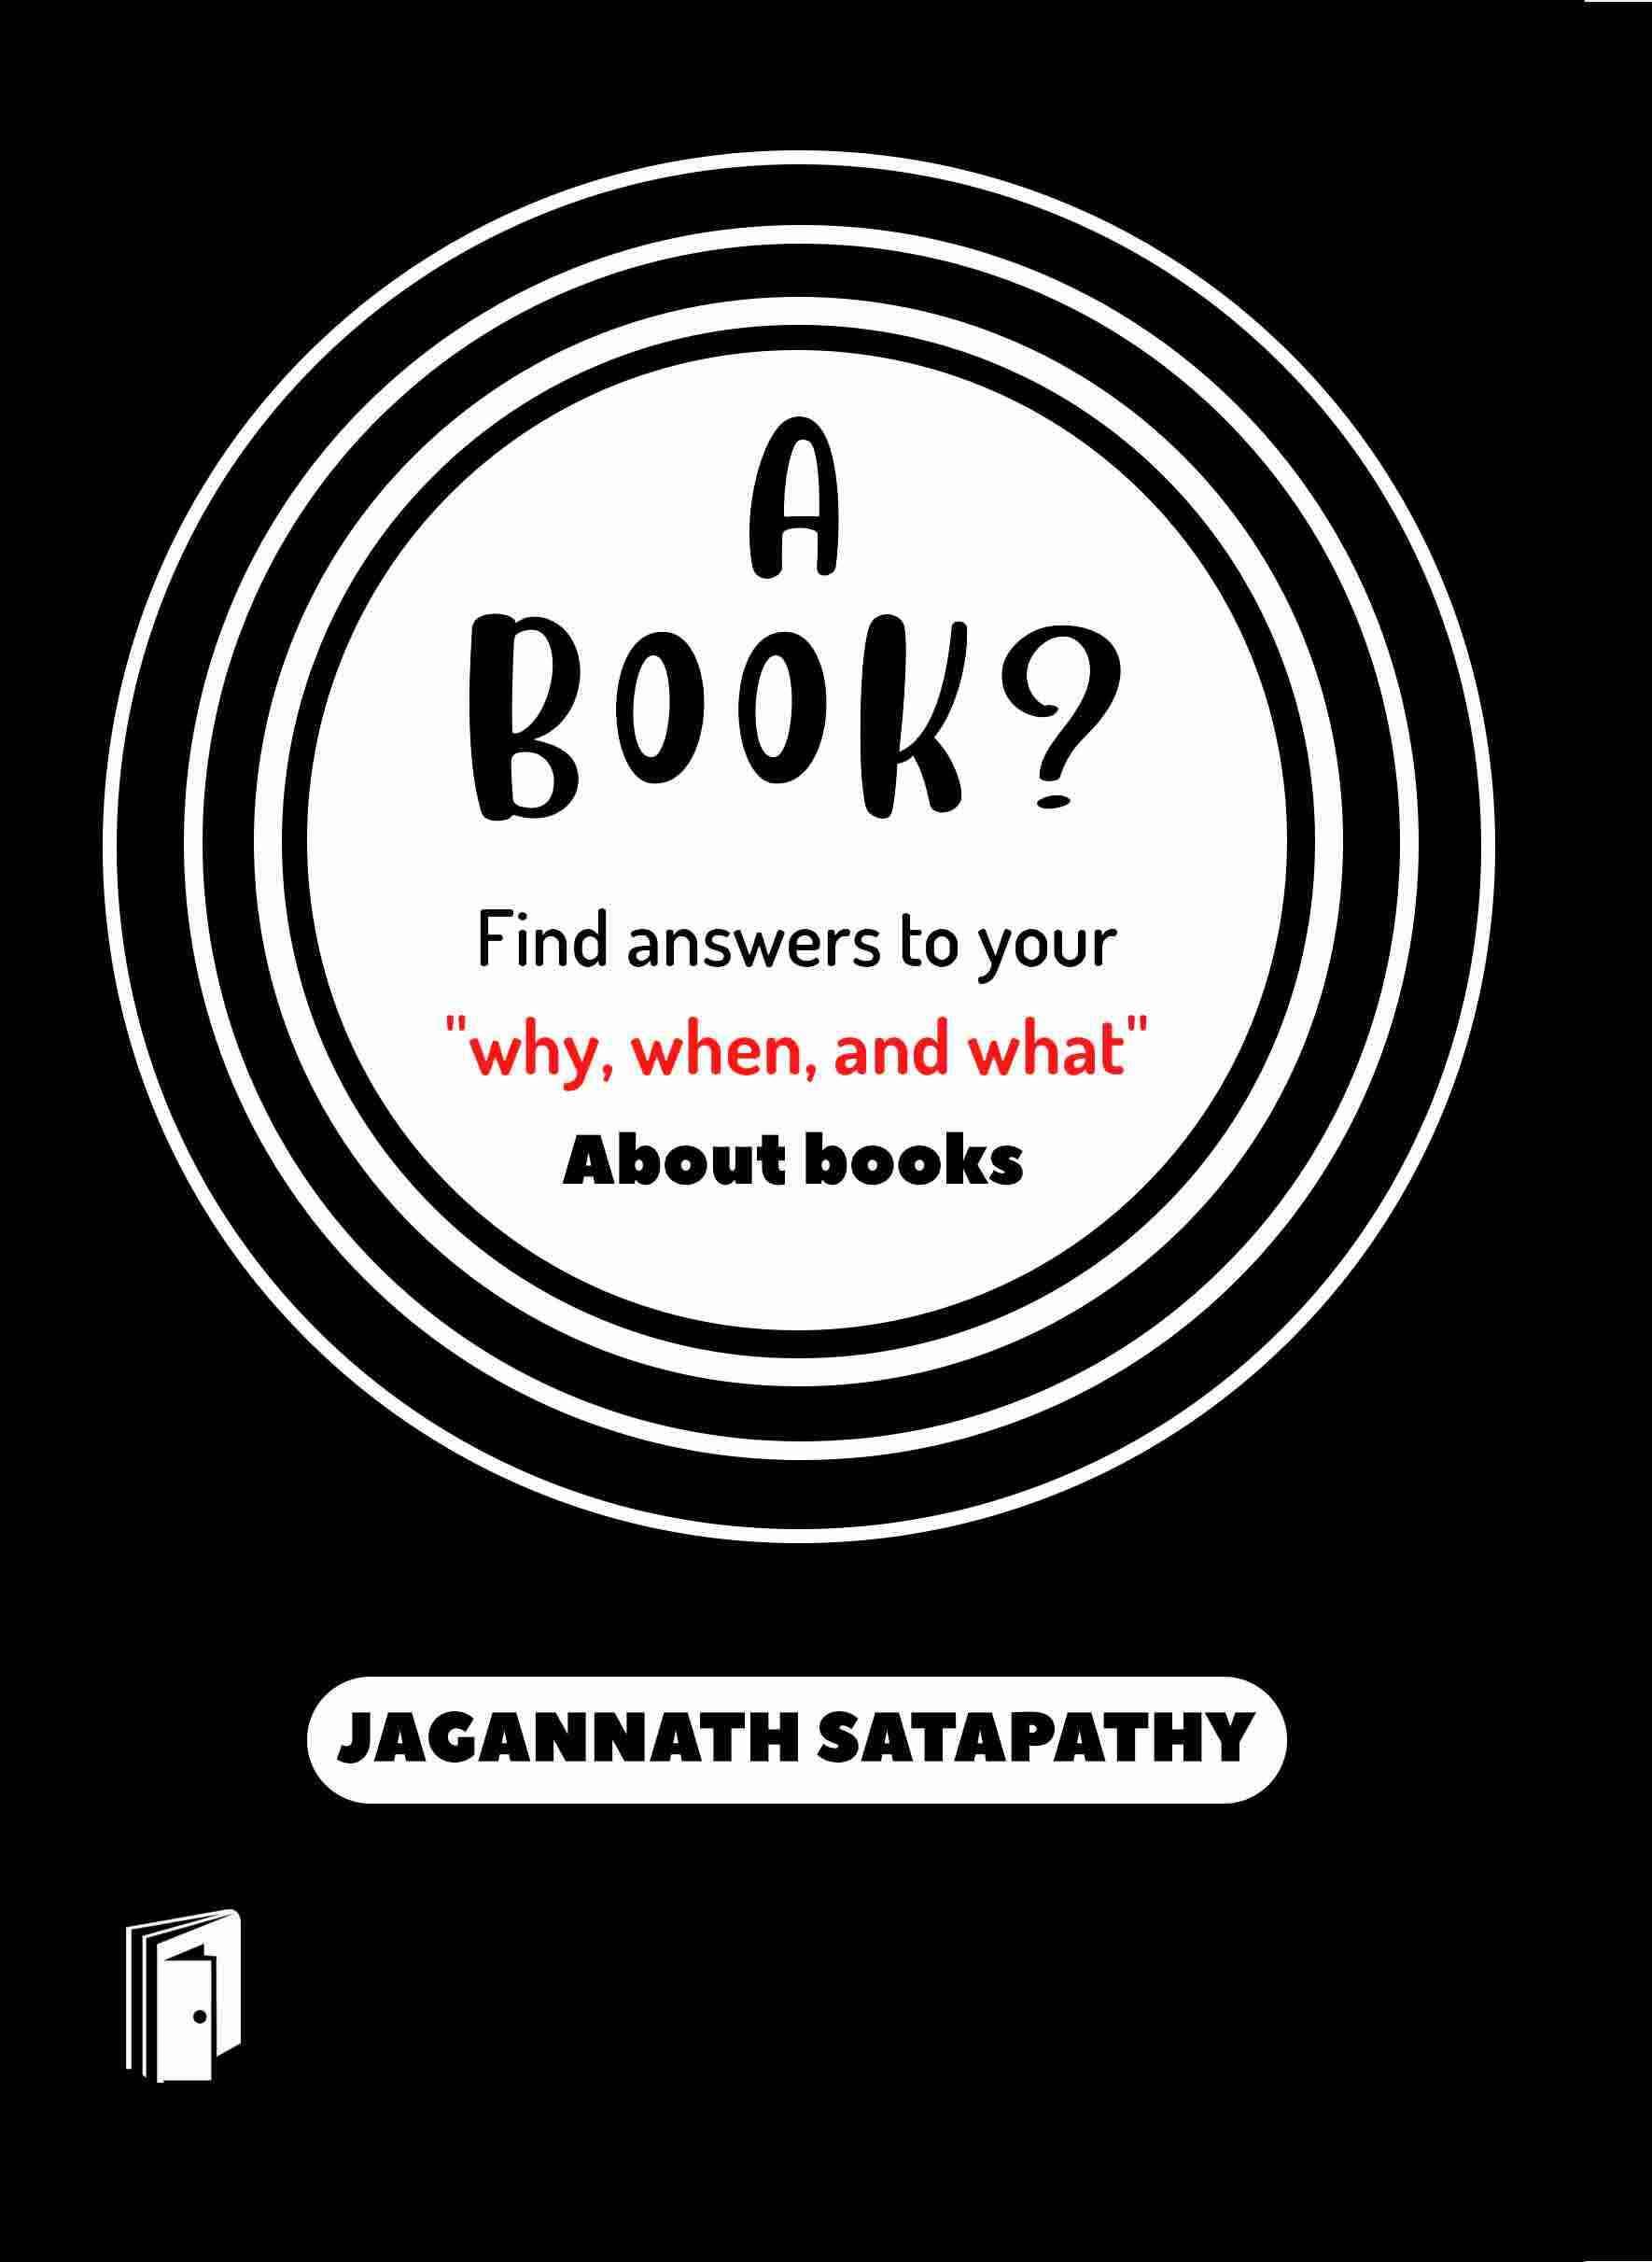 A BOOK ? FIND ANSWERS TO YOUR WHY WHEN AND WHAT BOOK QUESTIONS